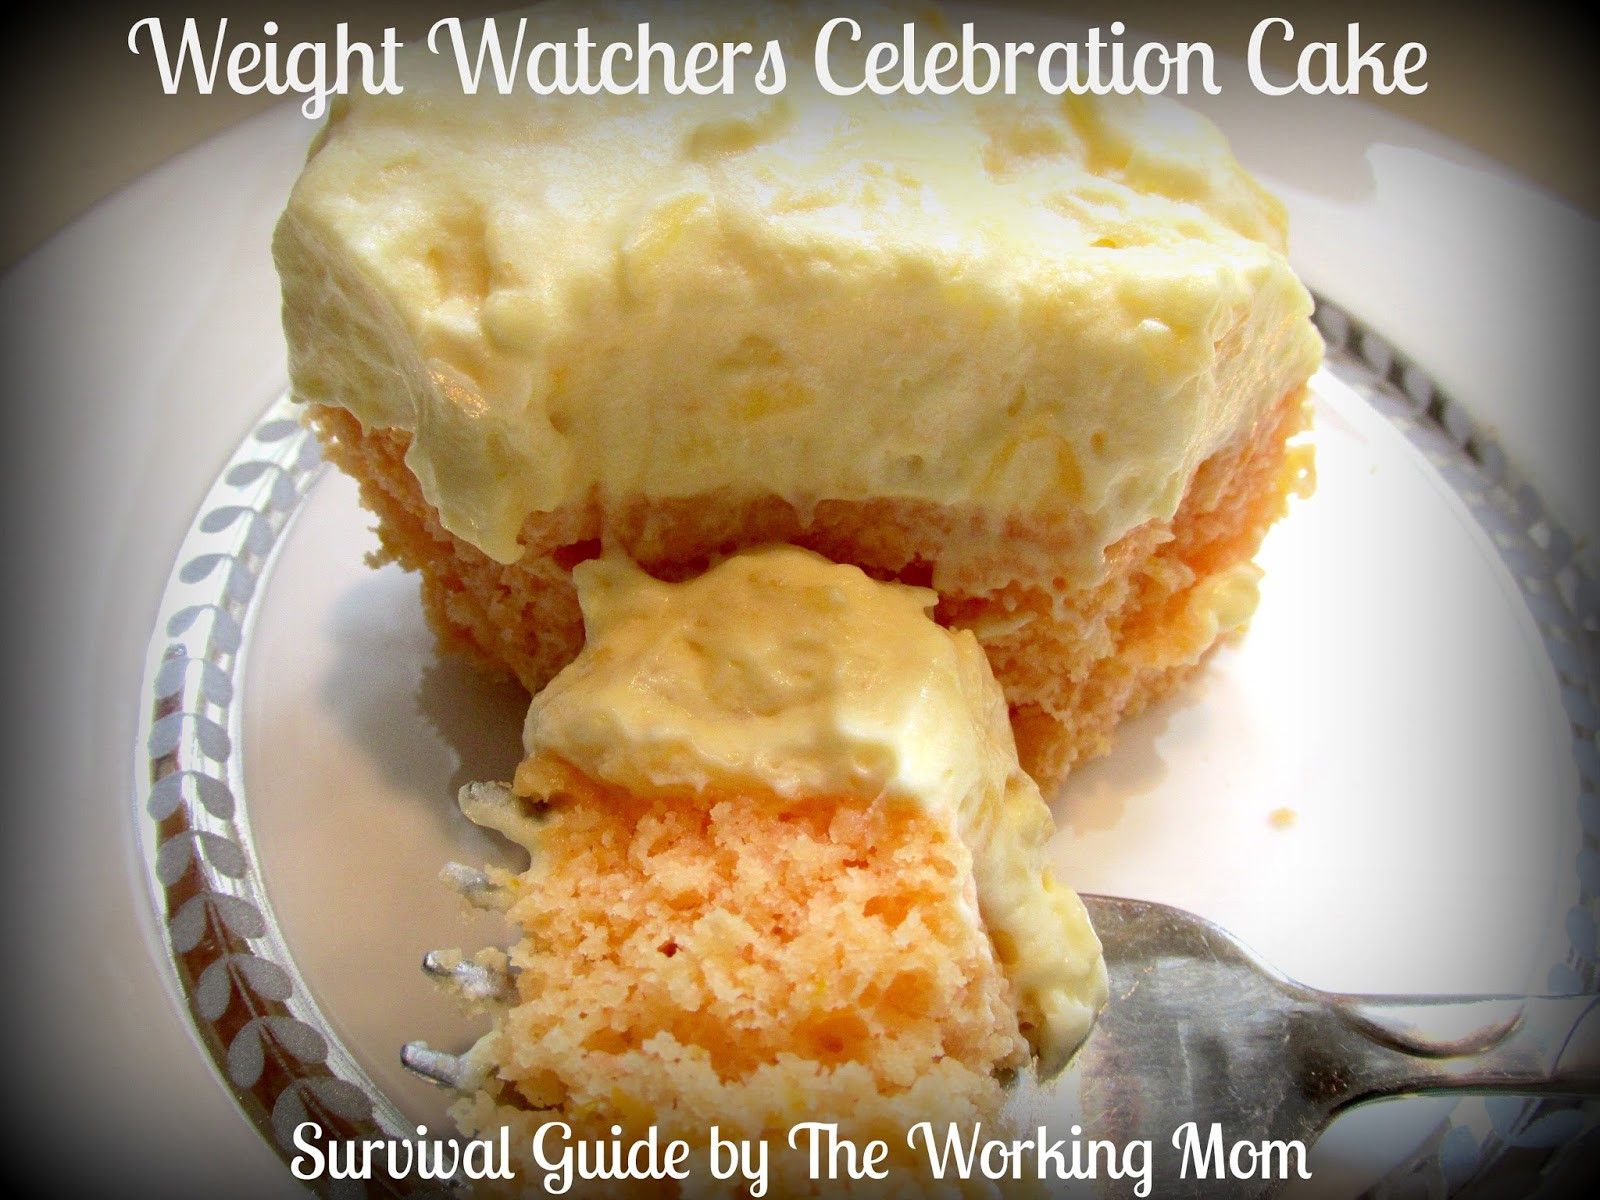 Weight Watchers Cake Recipe
 Survival Guide by The Working Mom Weight Watchers